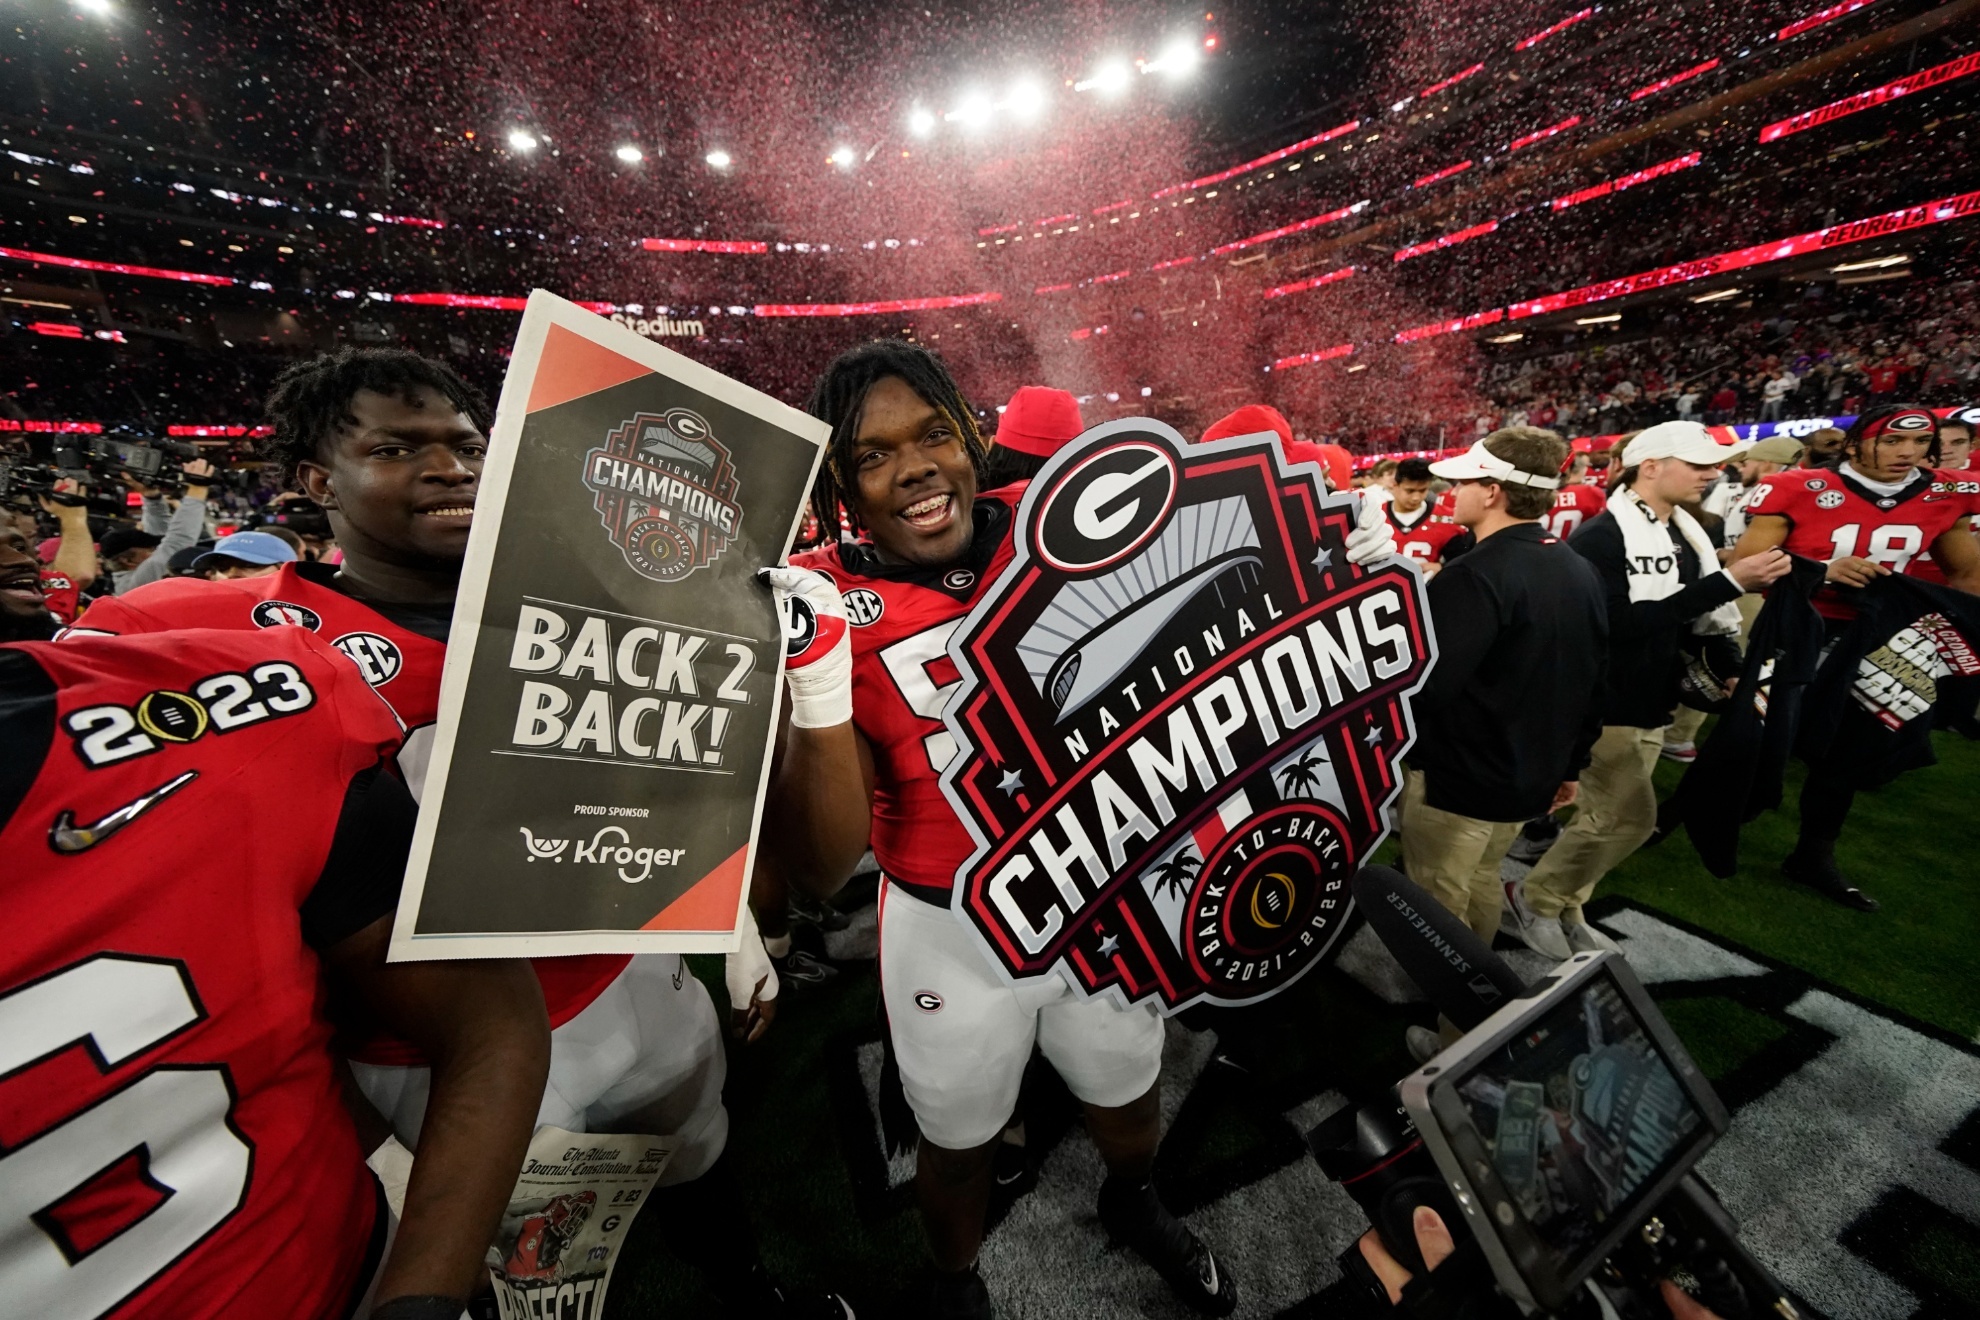 The Bulldogs won back-to-back National Championships.